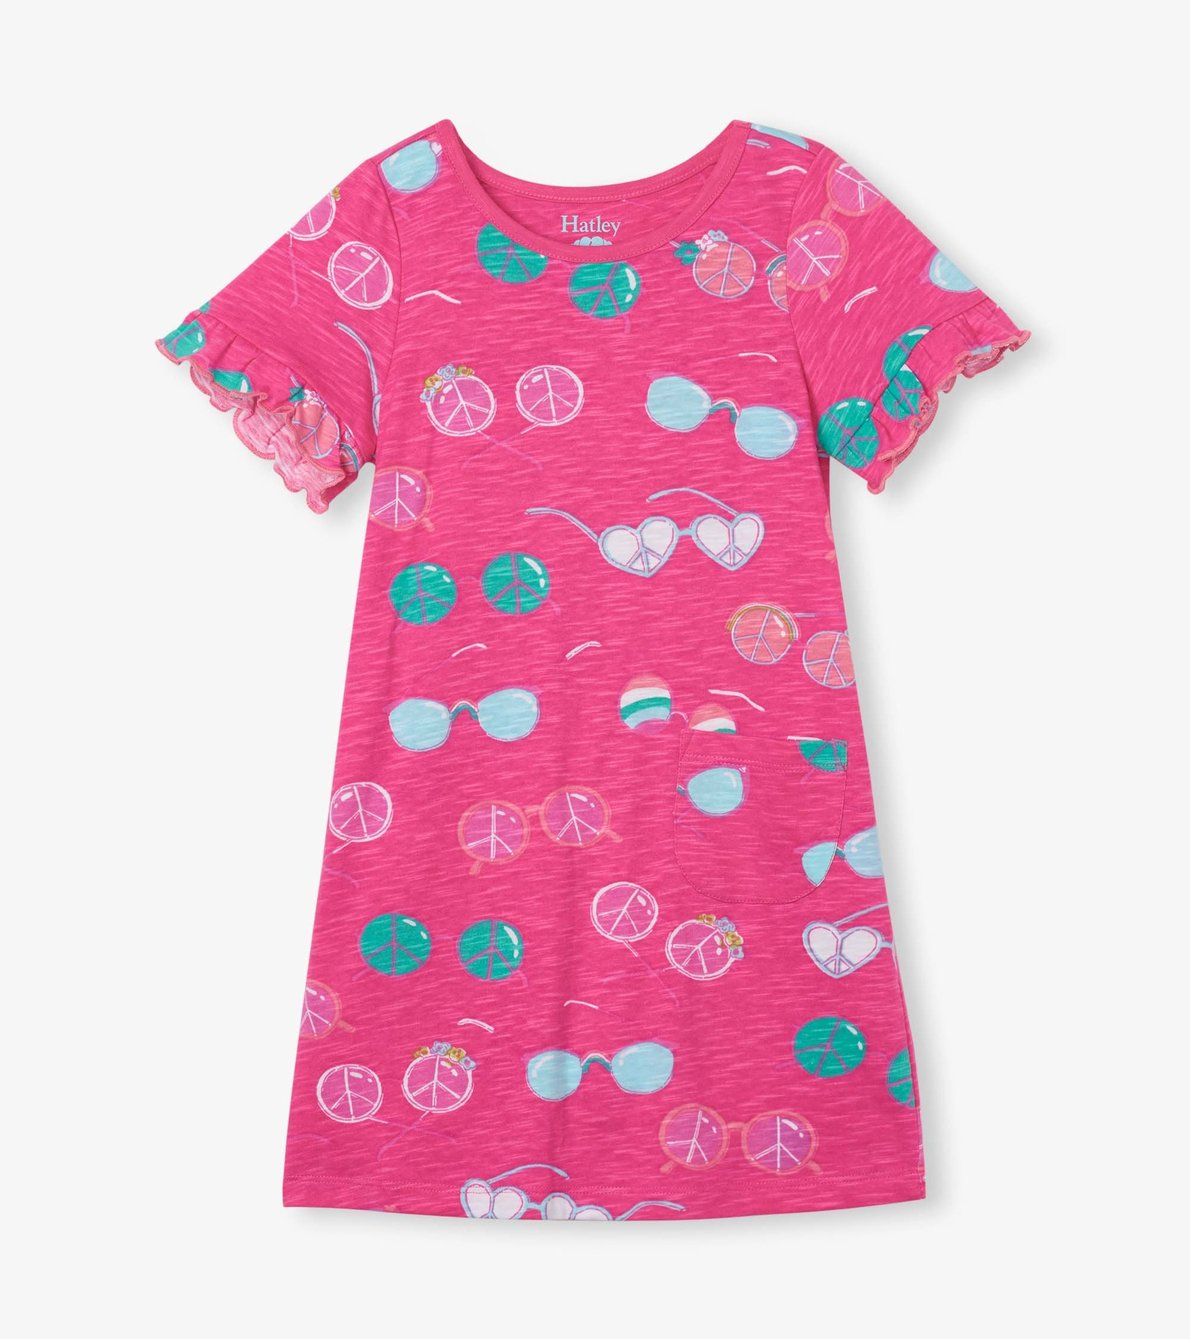 View larger image of Groovy Glasses Tee Shirt Dress